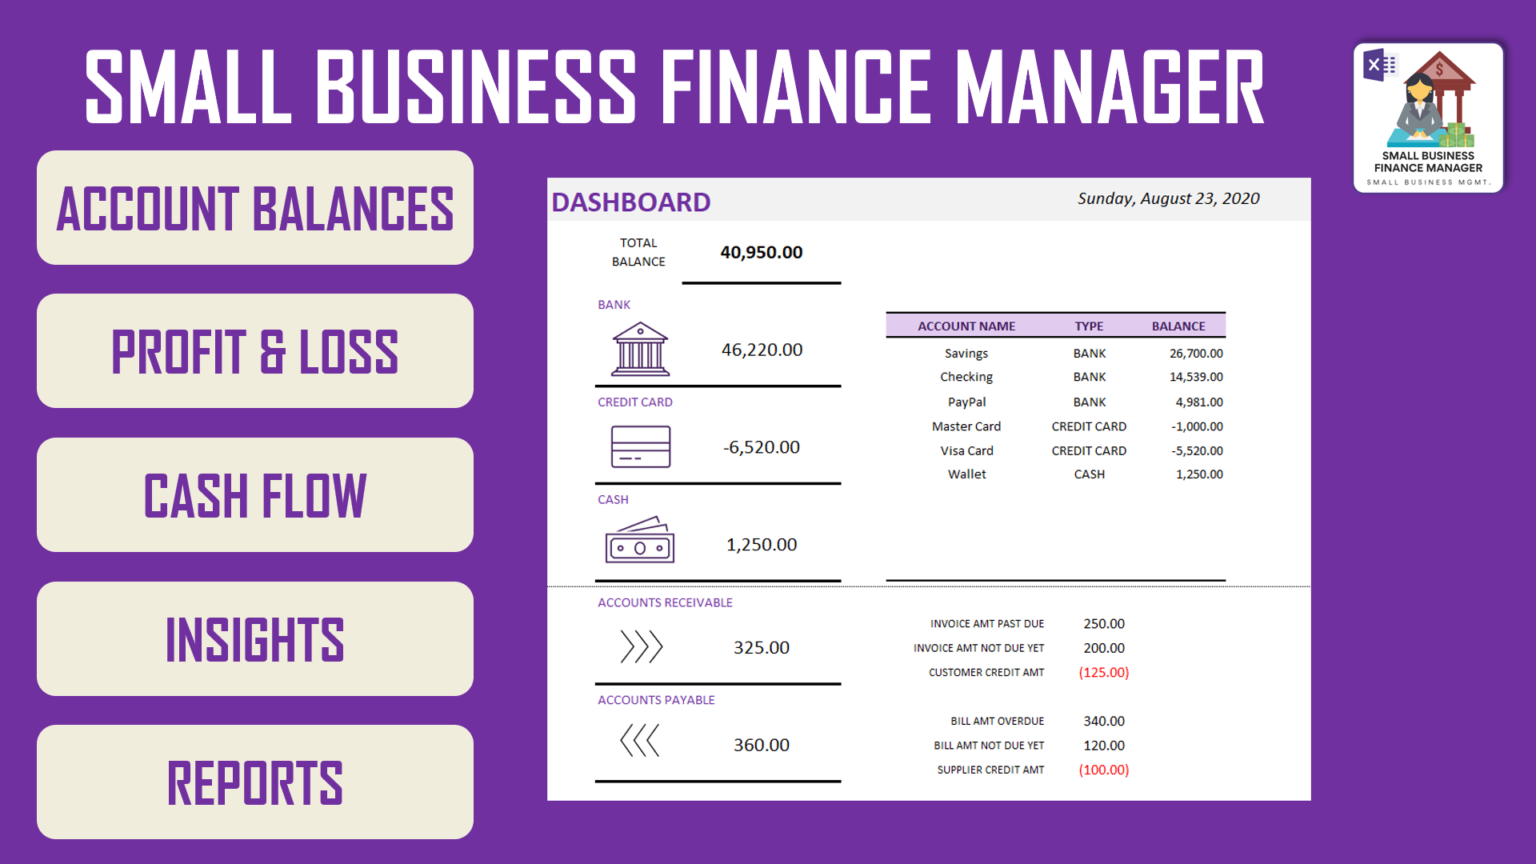 Download Small Business Finance Manager Excel Template